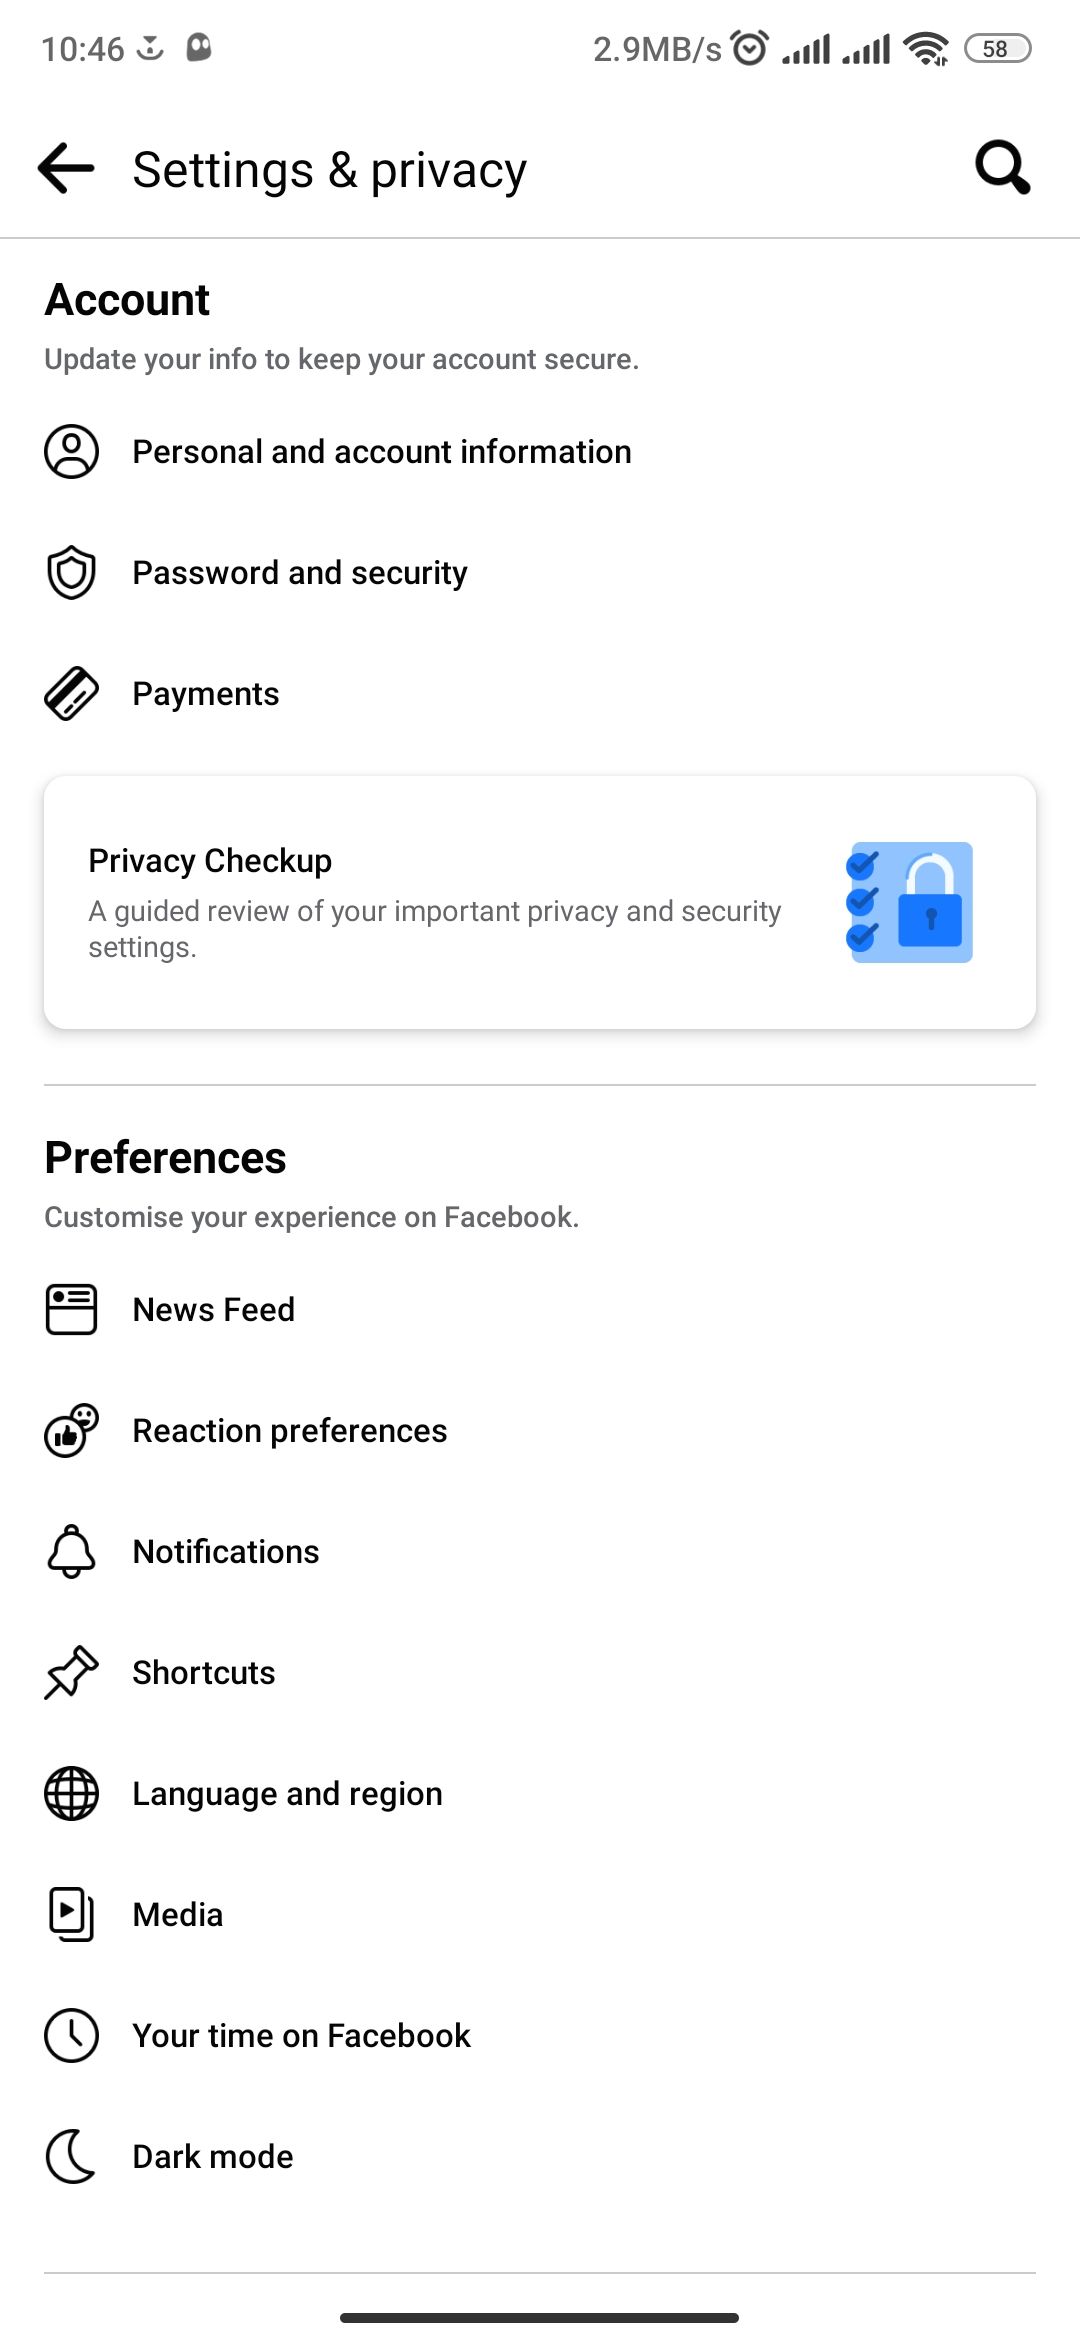 Facebook Settings and privacy page on Android